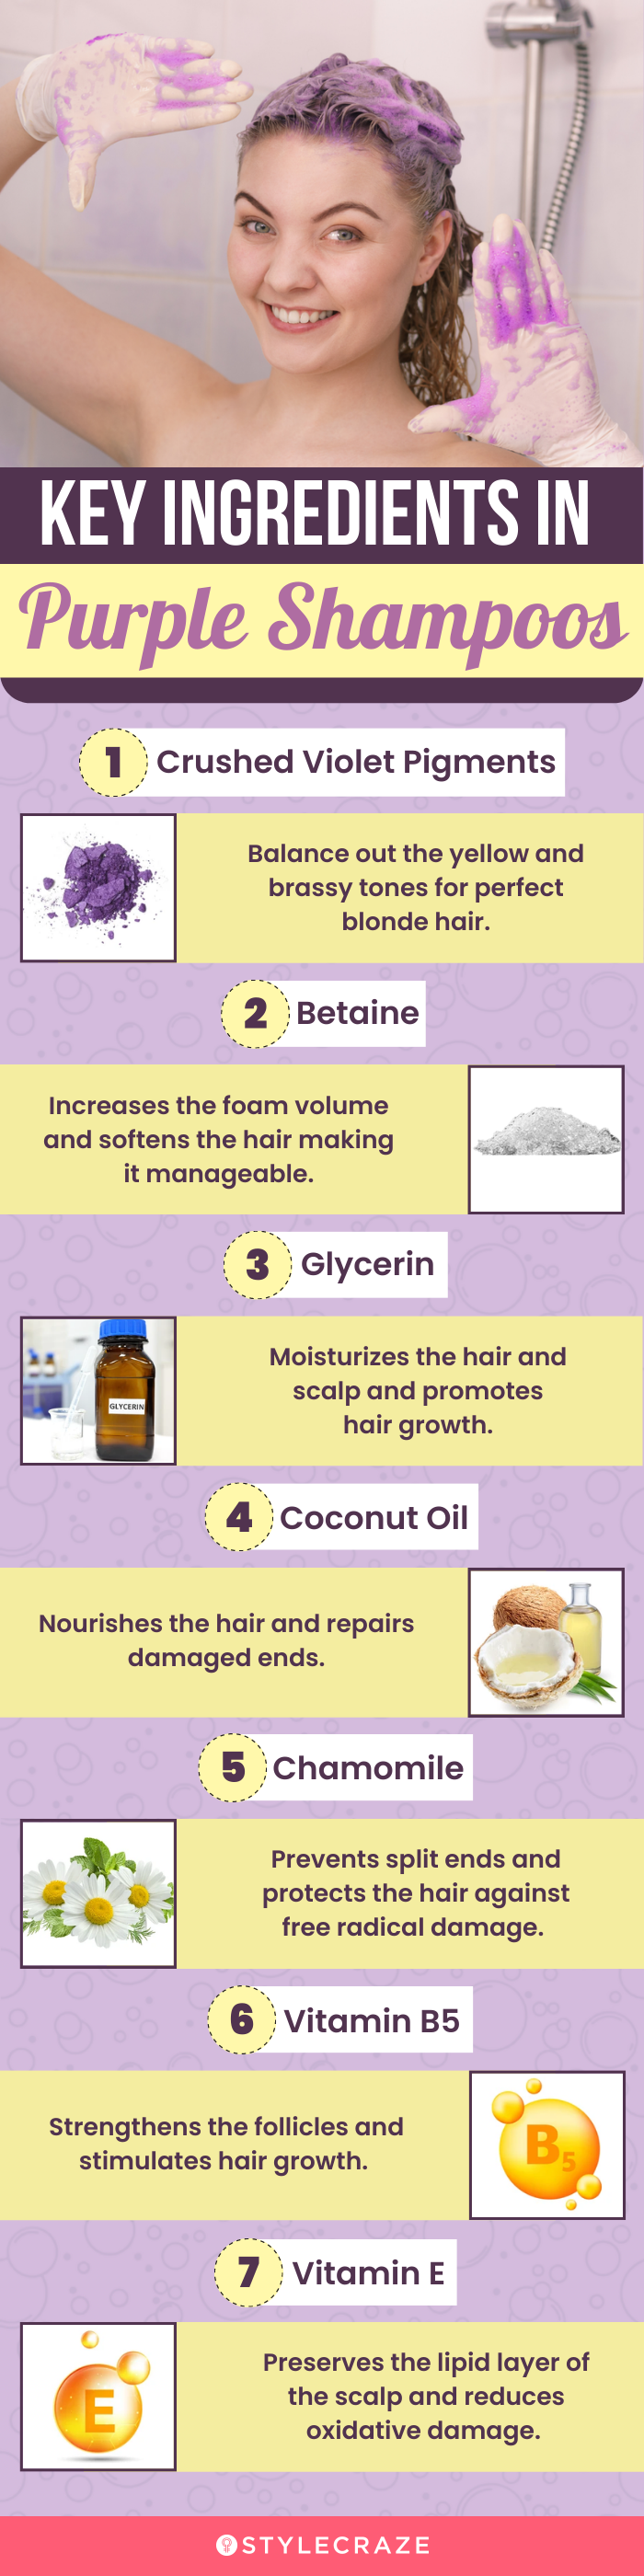 Key Ingredients In Purple Shampoos (infographic)